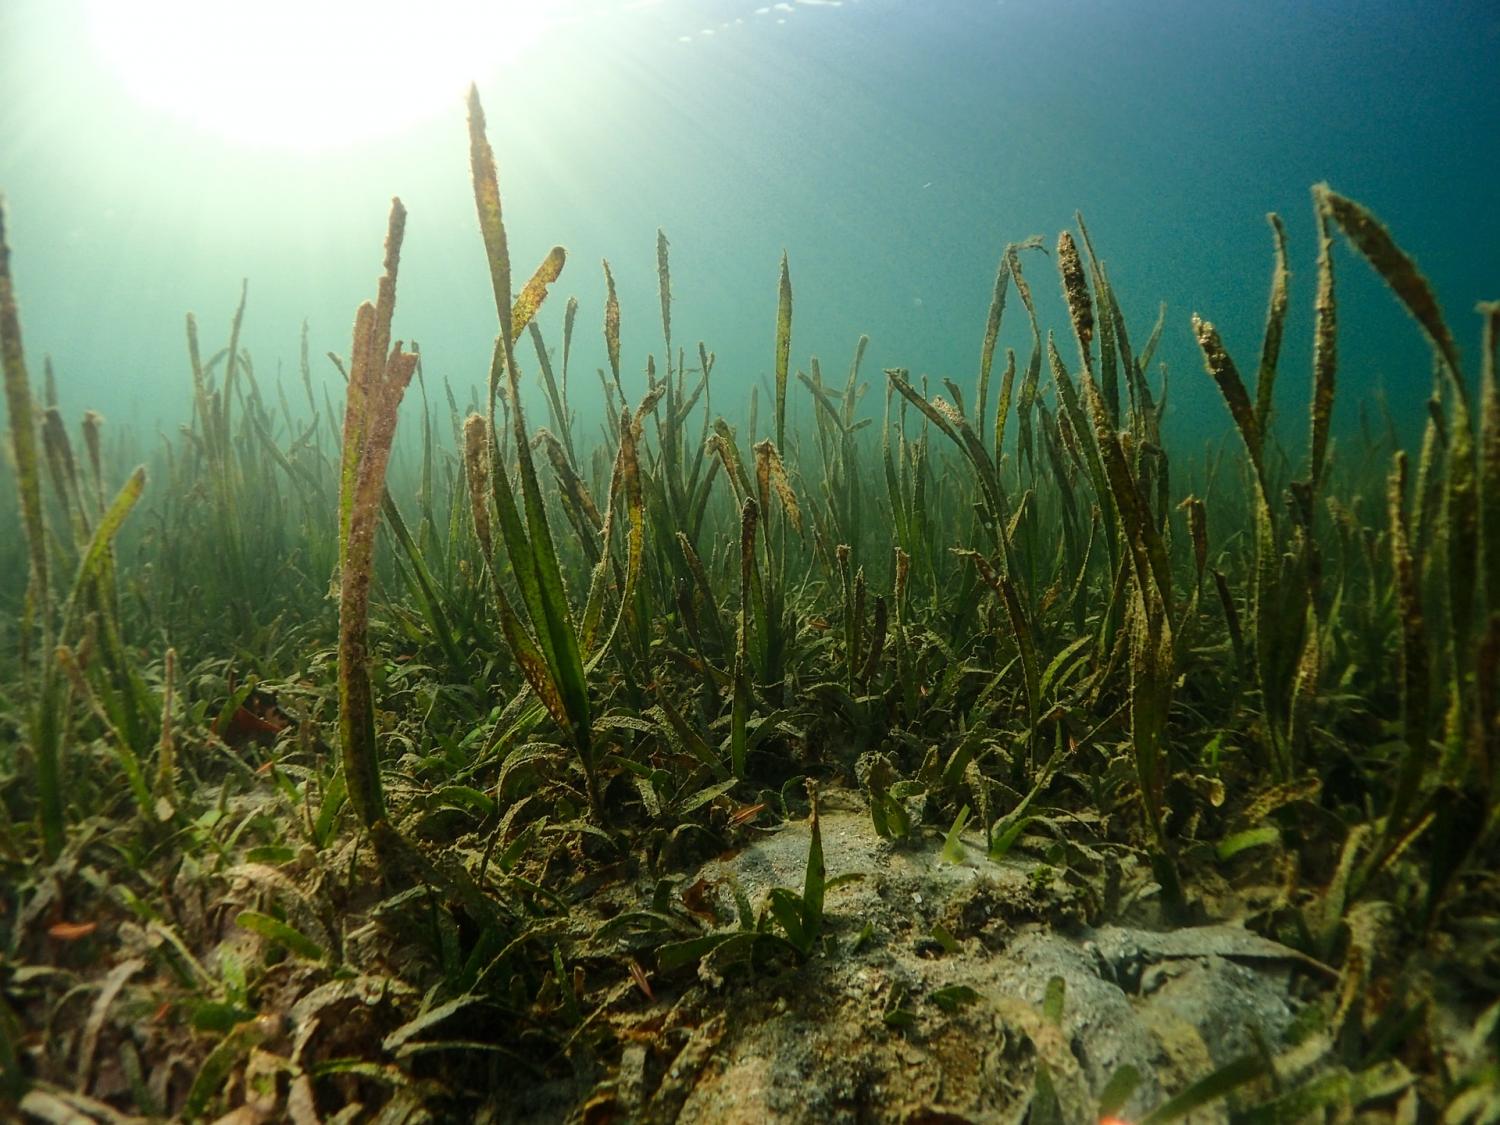 Carlsberg, Wwf Tackle The Other Deforestation Crisis: Seagrass Loss photo